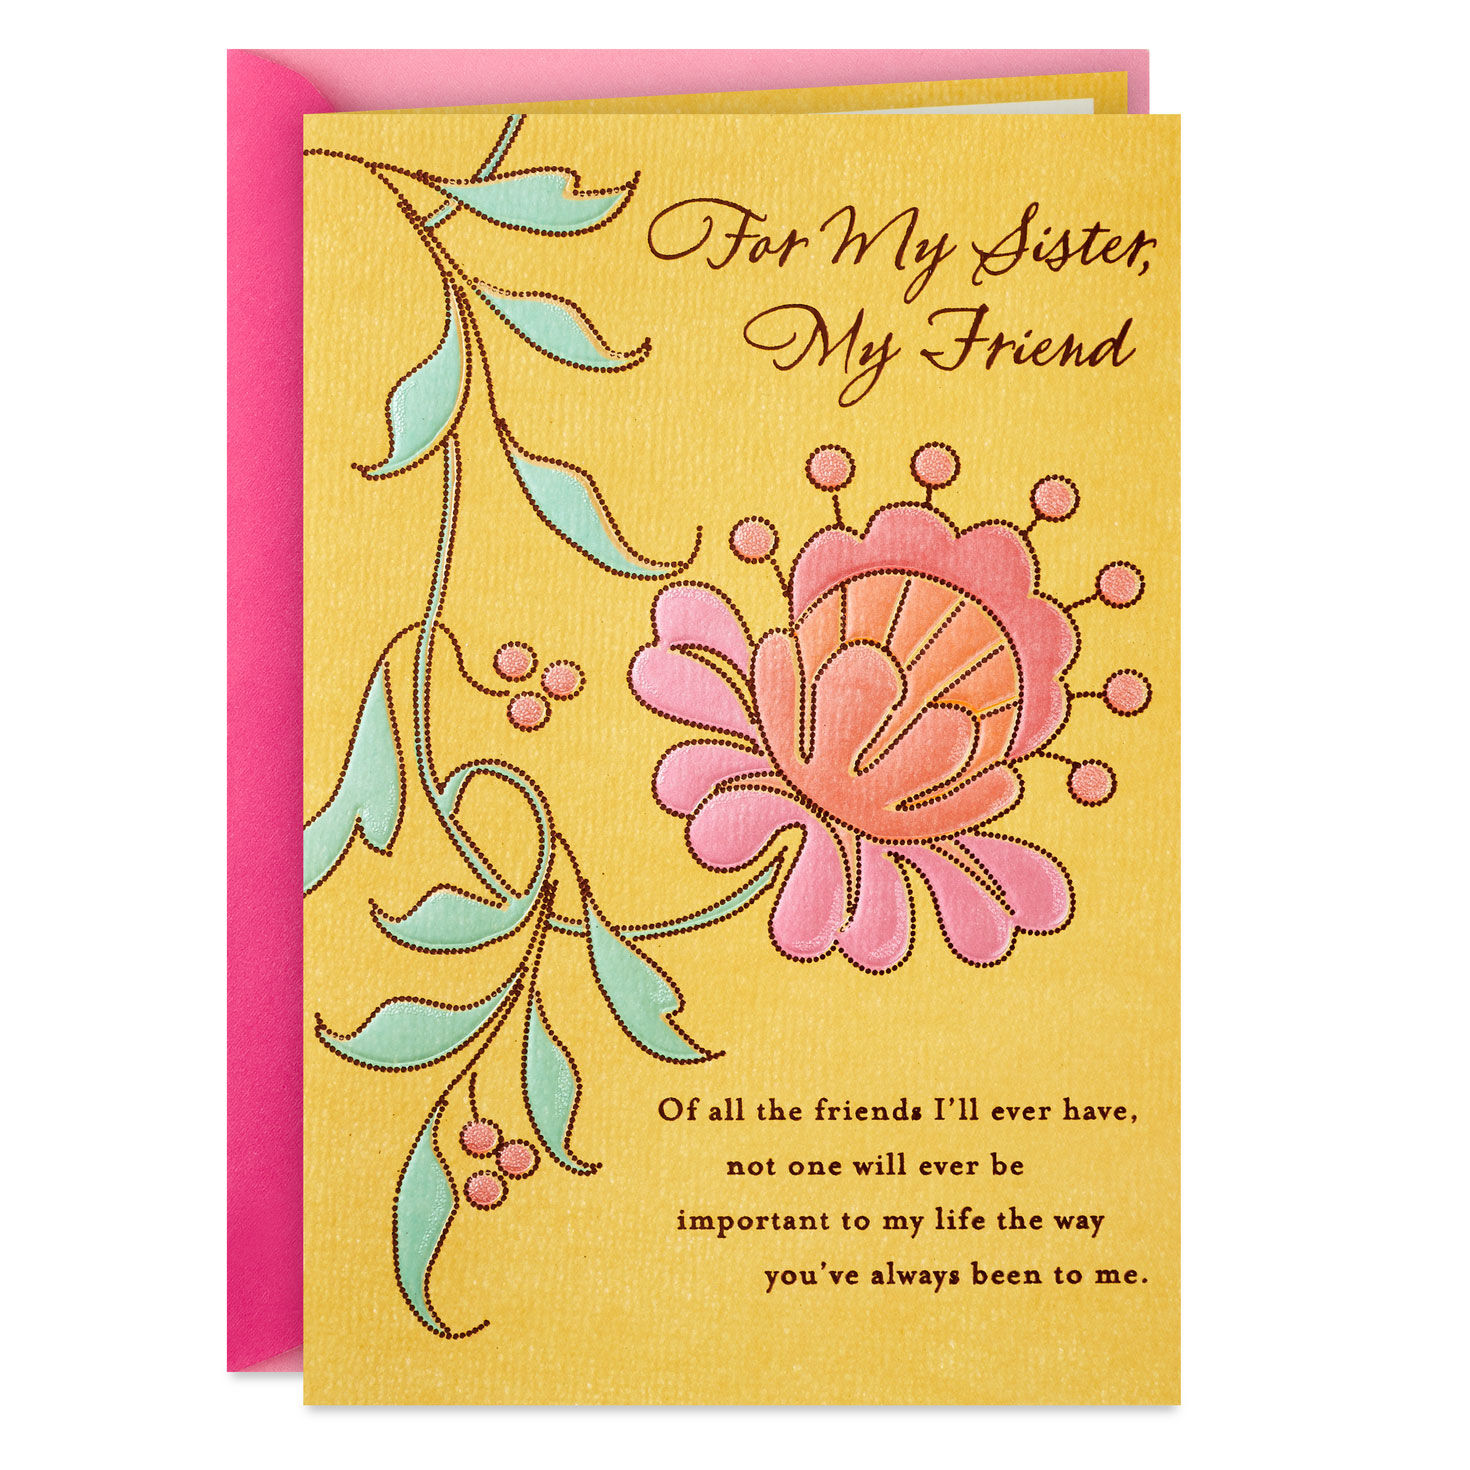 I Always Turn to You Birthday Card for Sister for only USD 5.99 | Hallmark